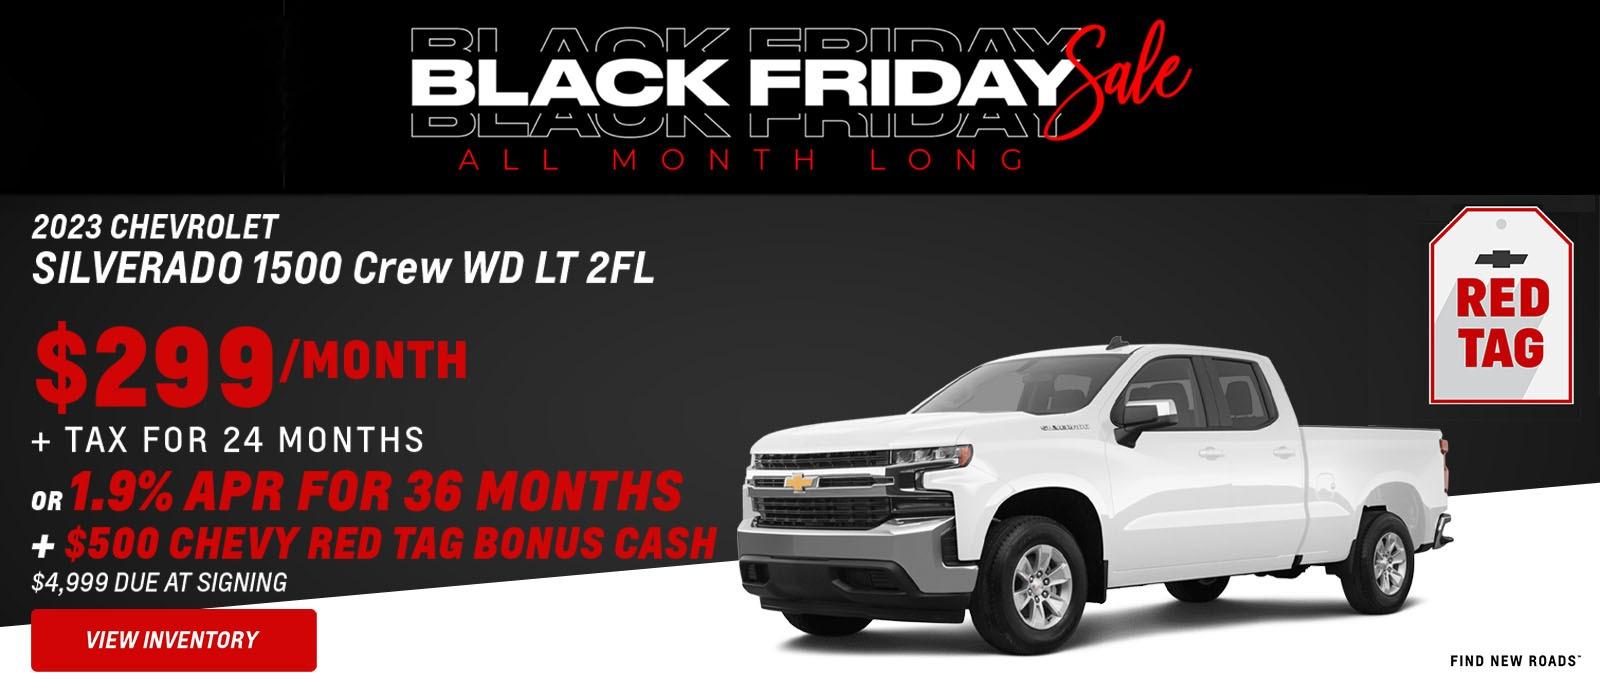 2023 Silverado Crew Cab WD LT 2FL
$299 per month +tax for 24 months 
or 
1.9% APR for 36 months + $500 Chevy Red Tag Bonus Cash 
$4,999 due at signing.